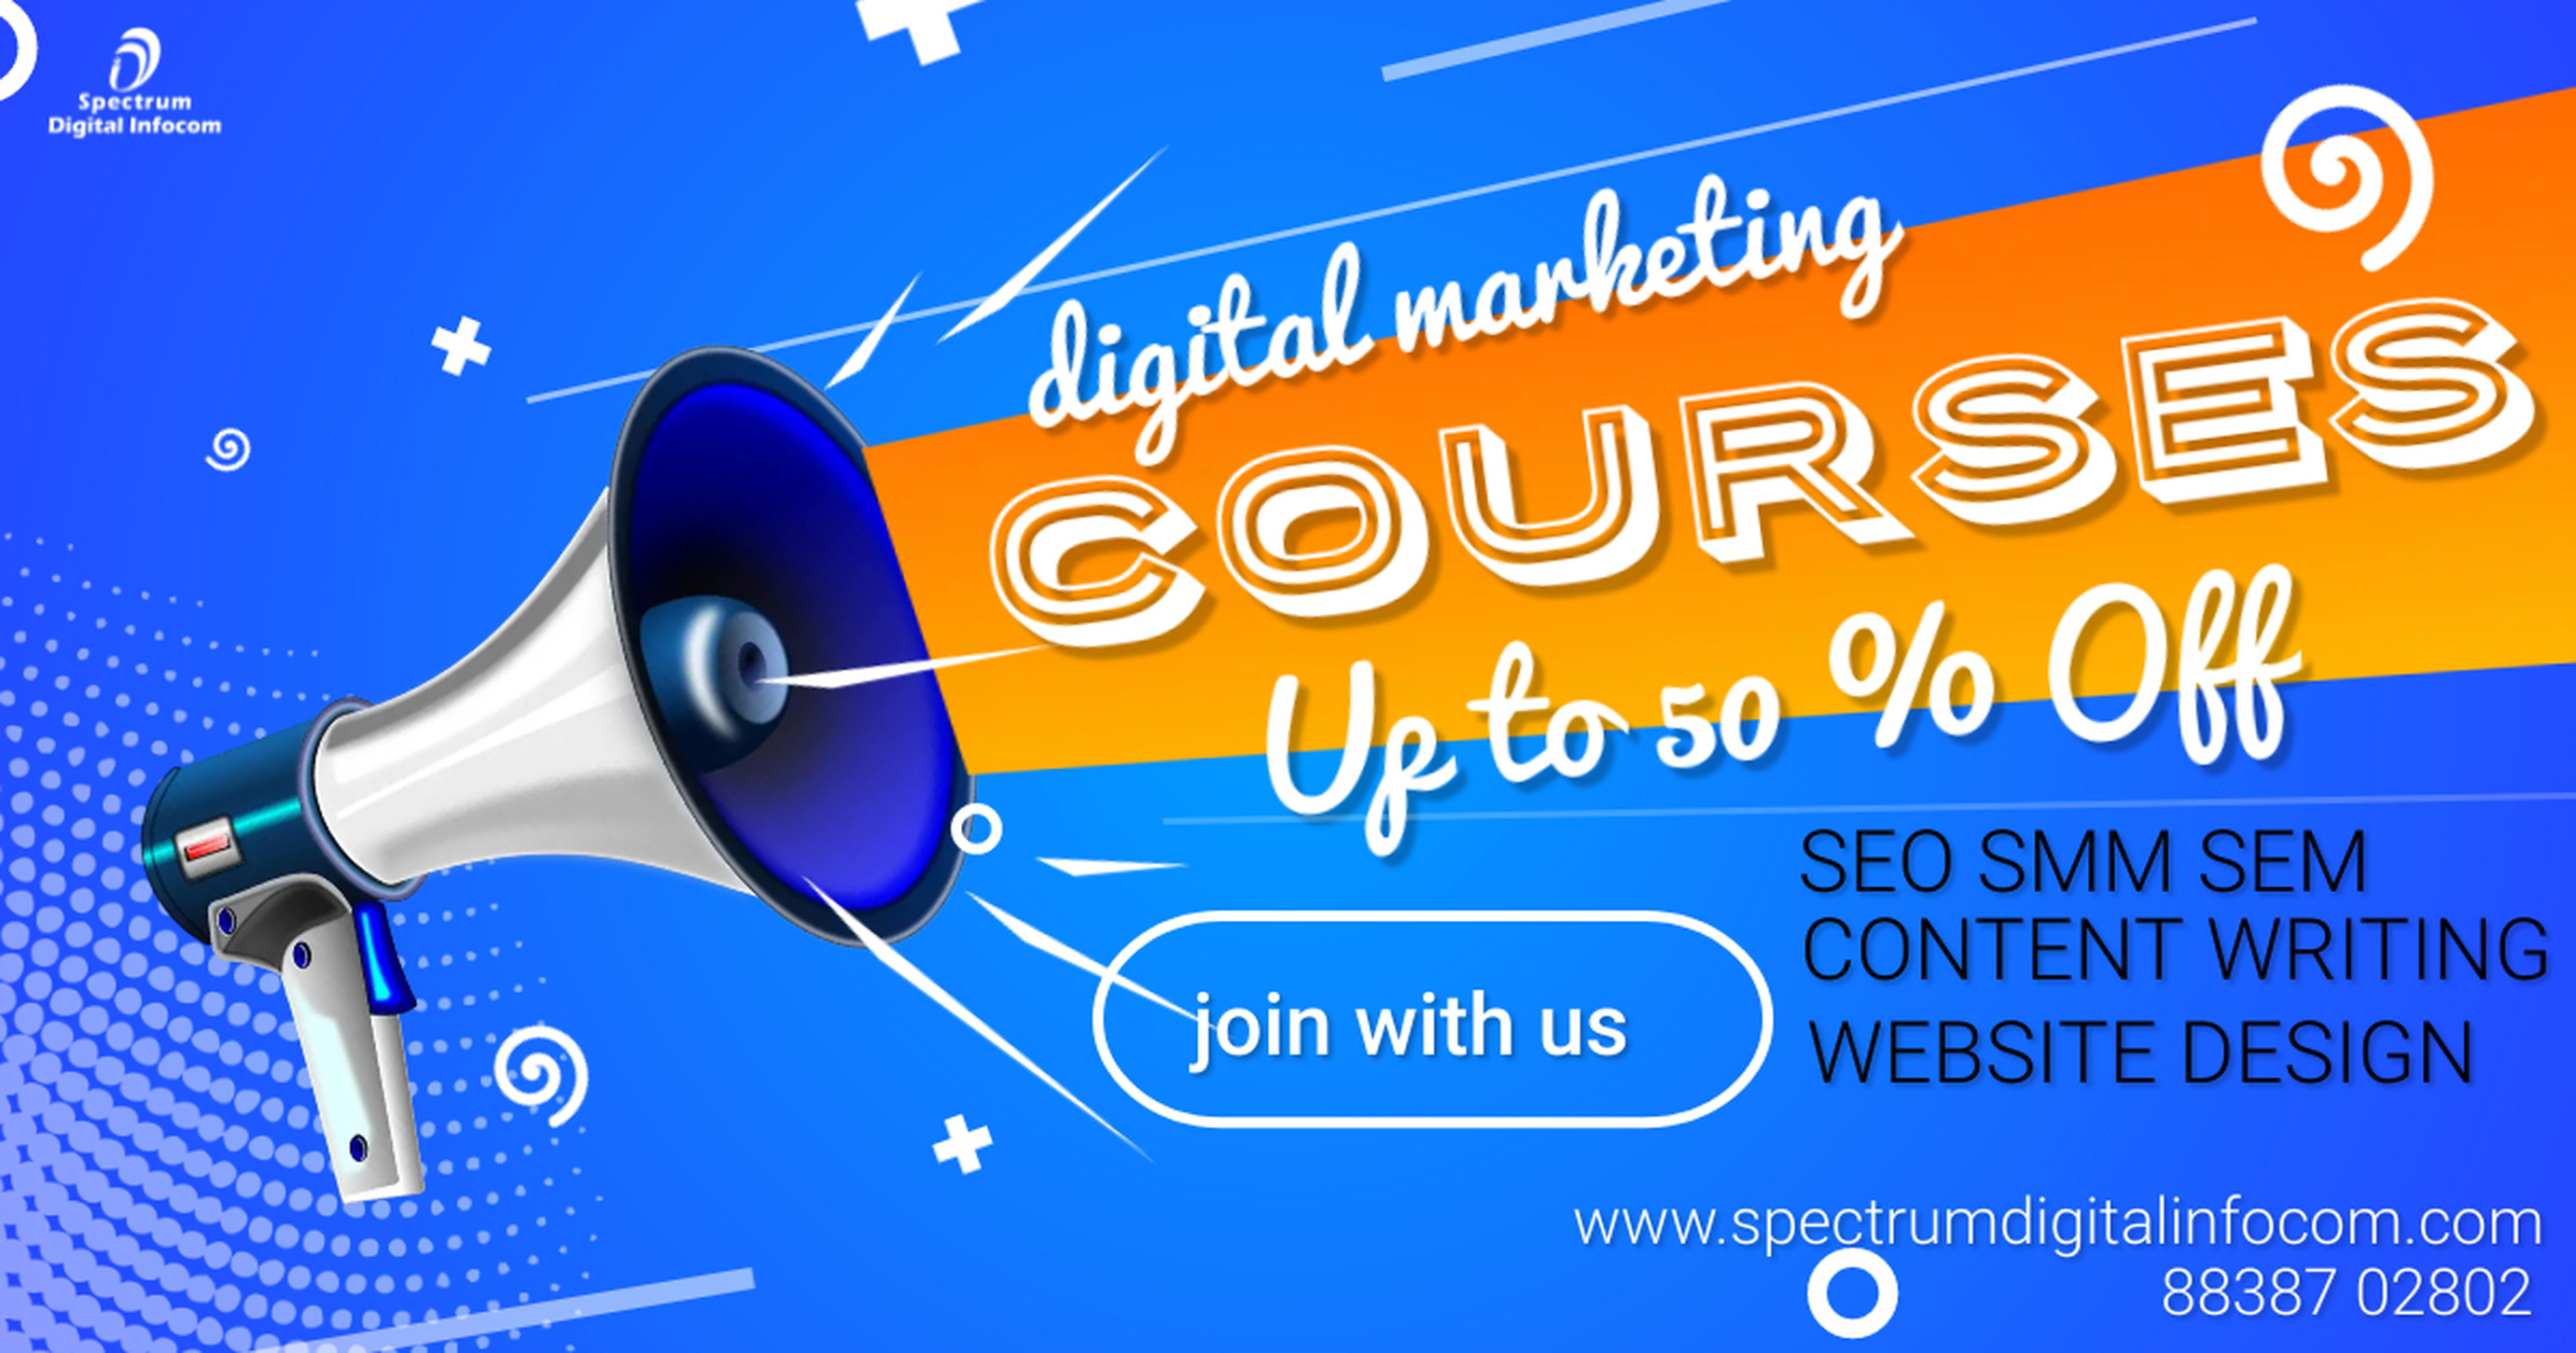 digital marketing course in coimbatore6565, Online Event